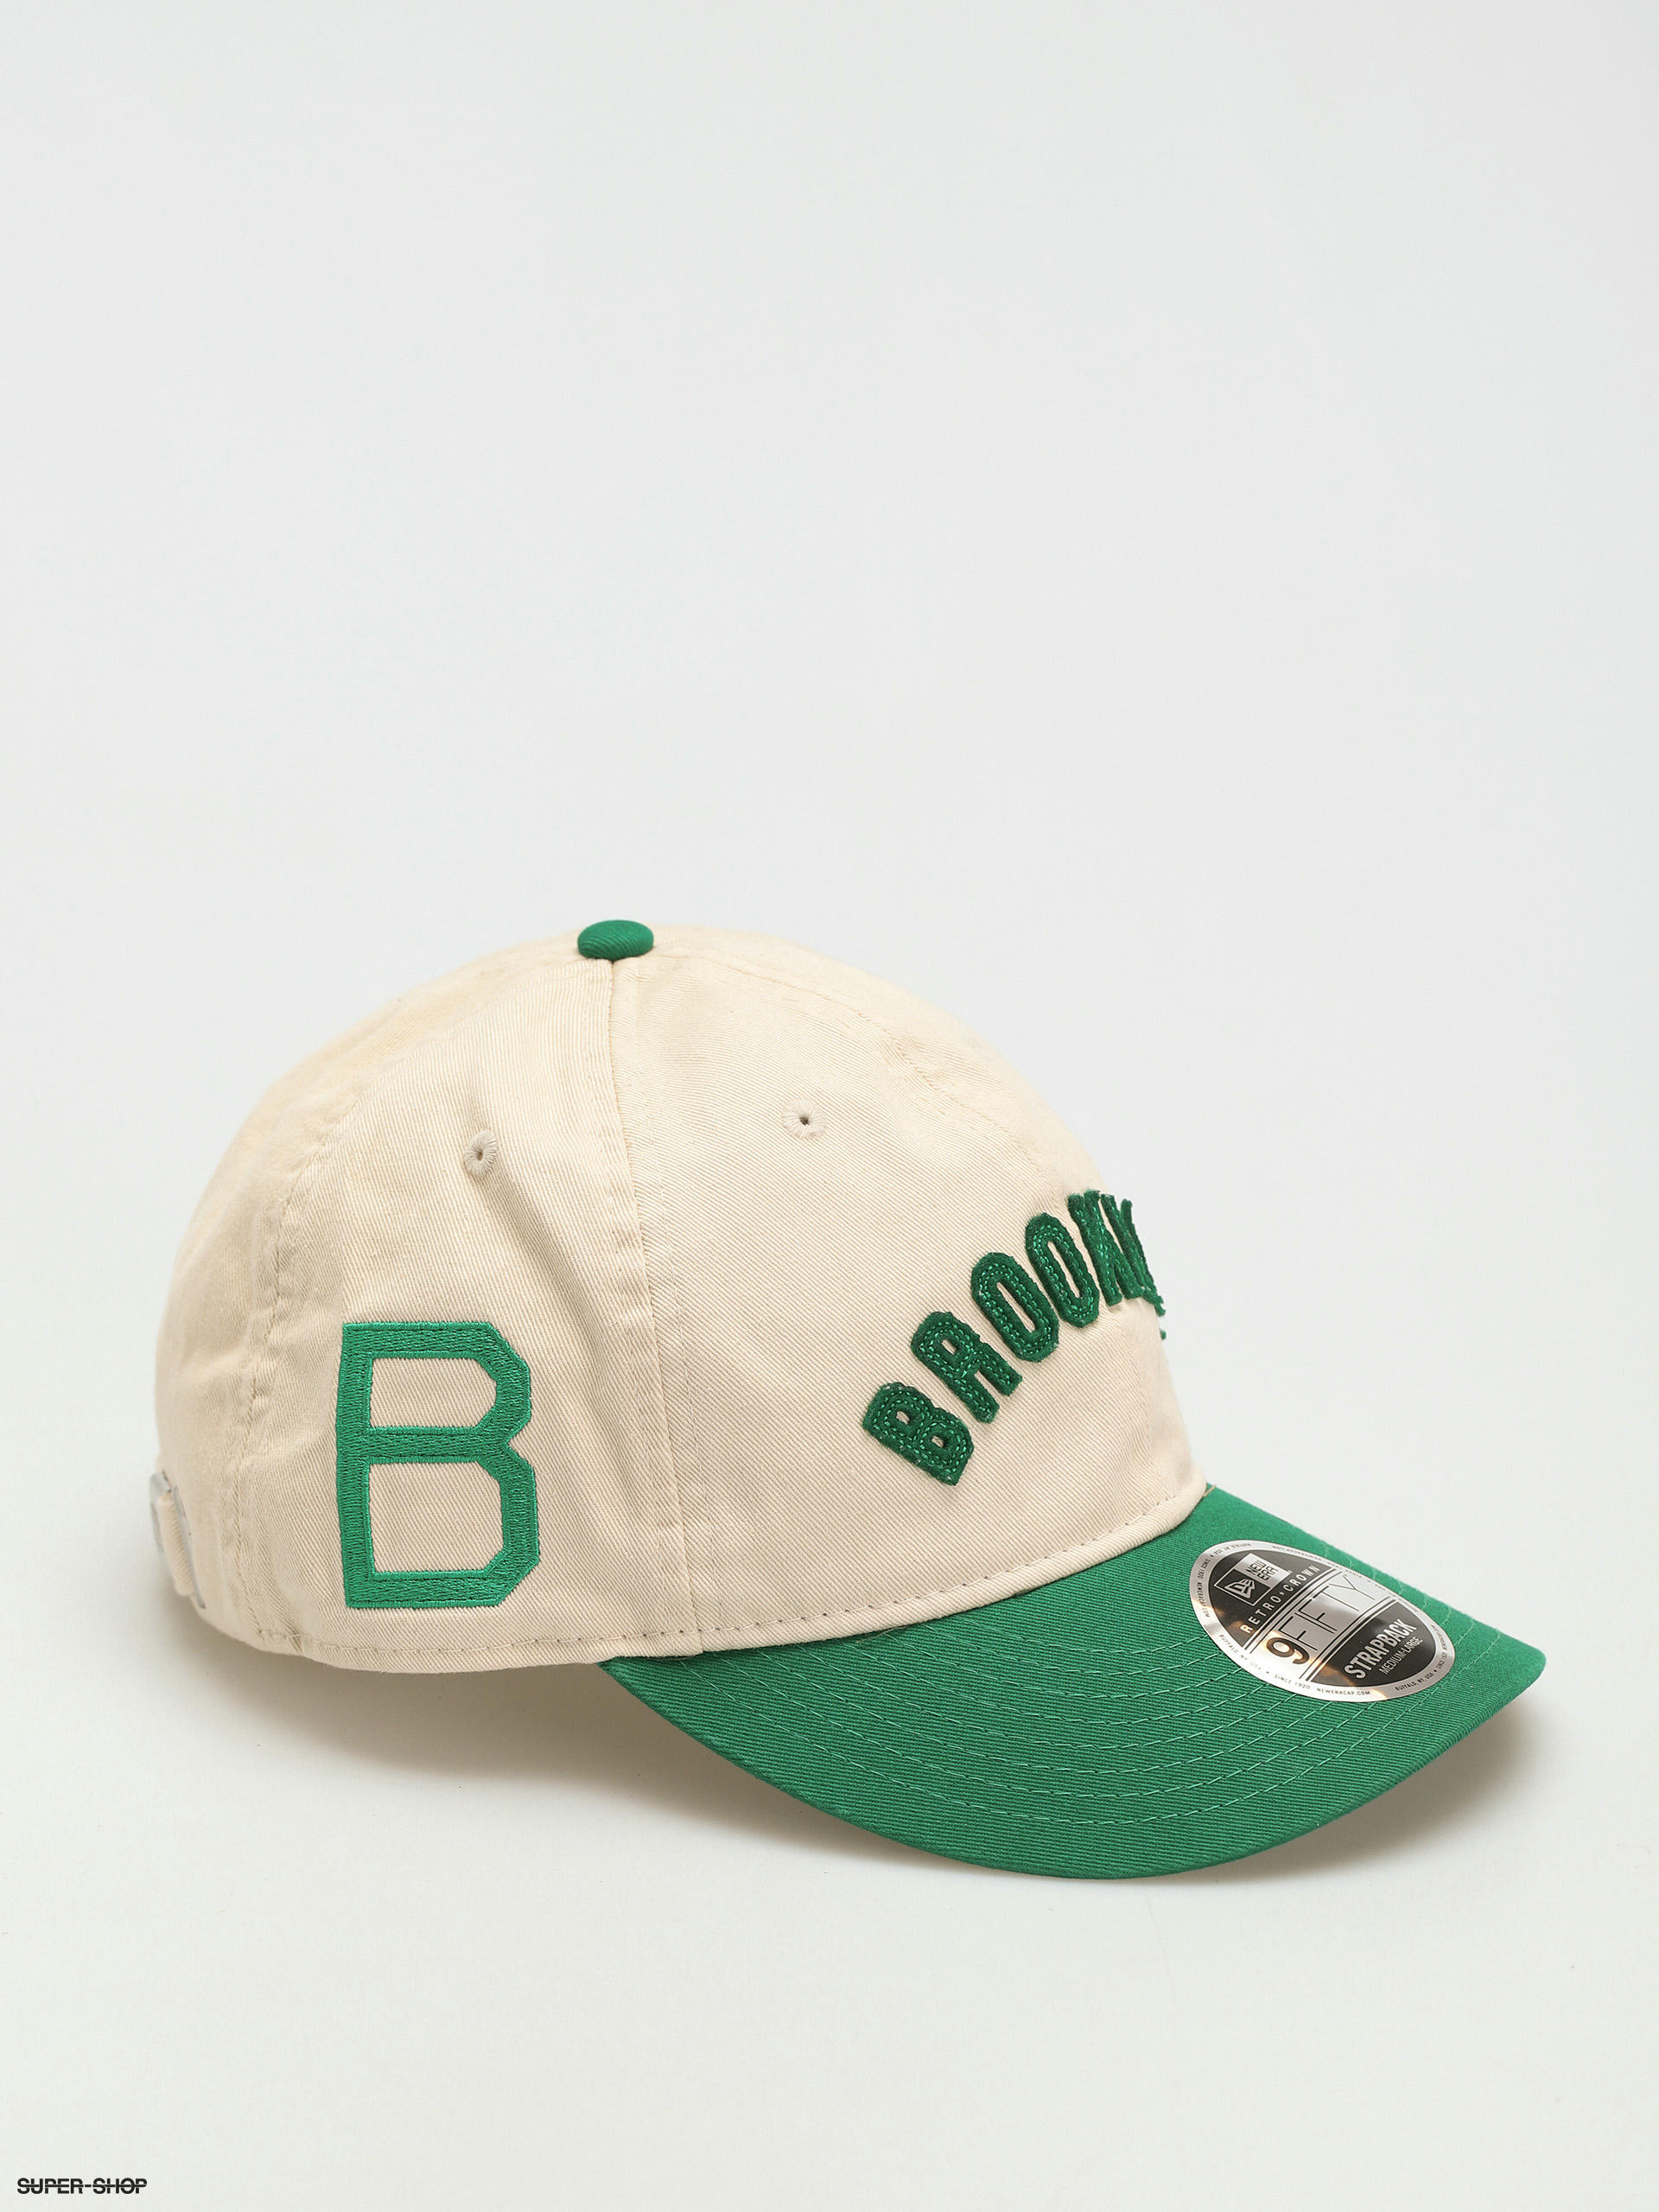 Brooklyn Dodgers New Era 59Fifty Fitted Hat (Retro Greeen Under